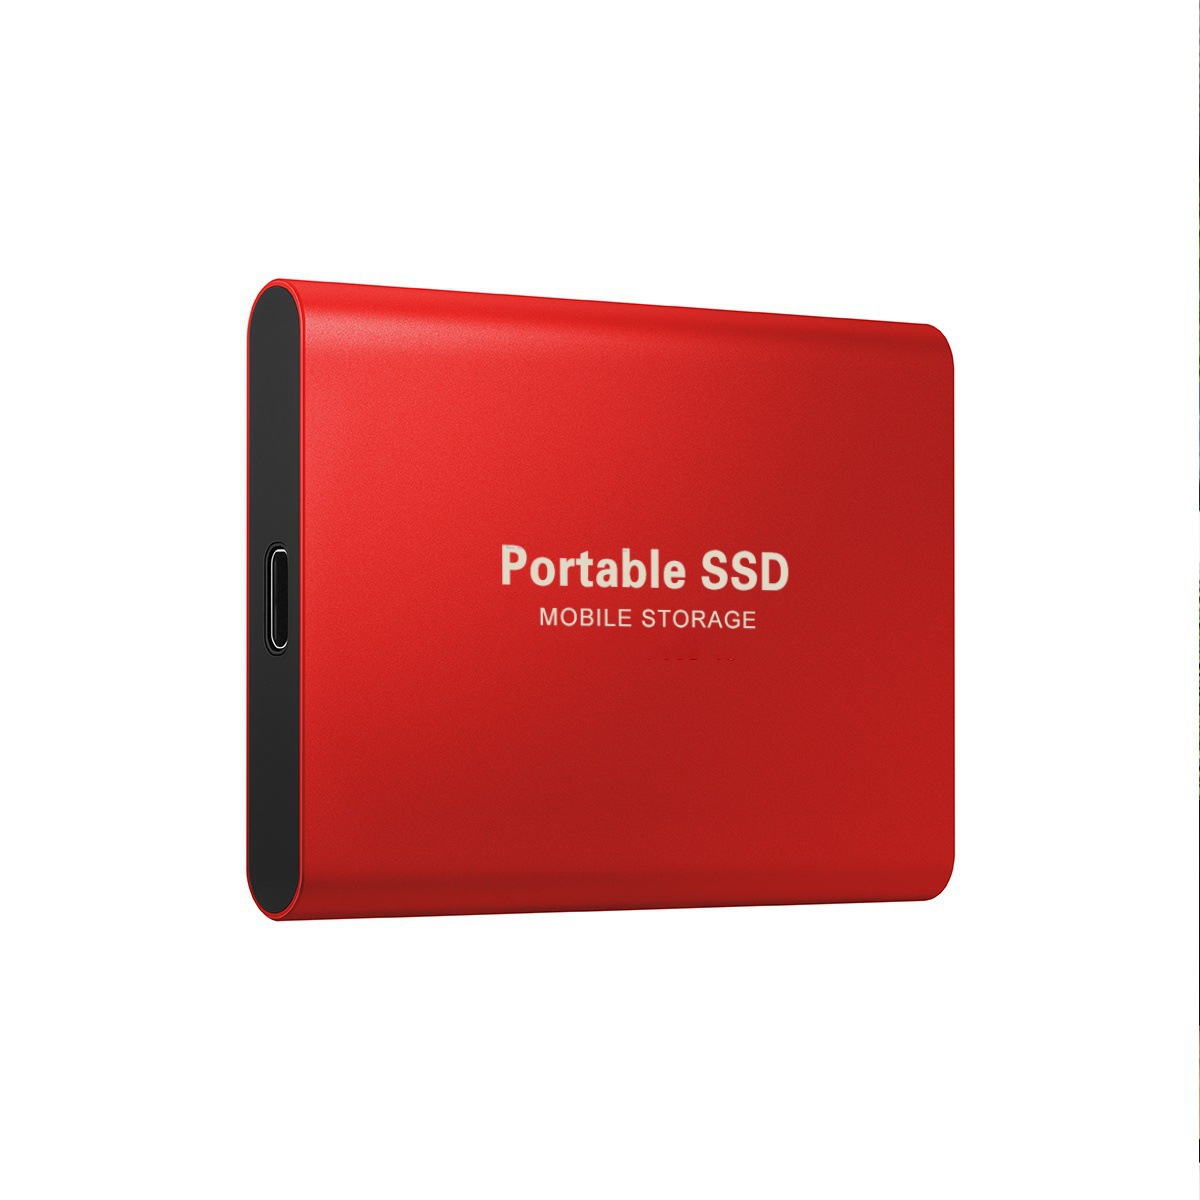 16TB/8TB/4TB/2TB HD Ultra Speed External SSD - Portable & Large Capability Mobile Solid State Drive